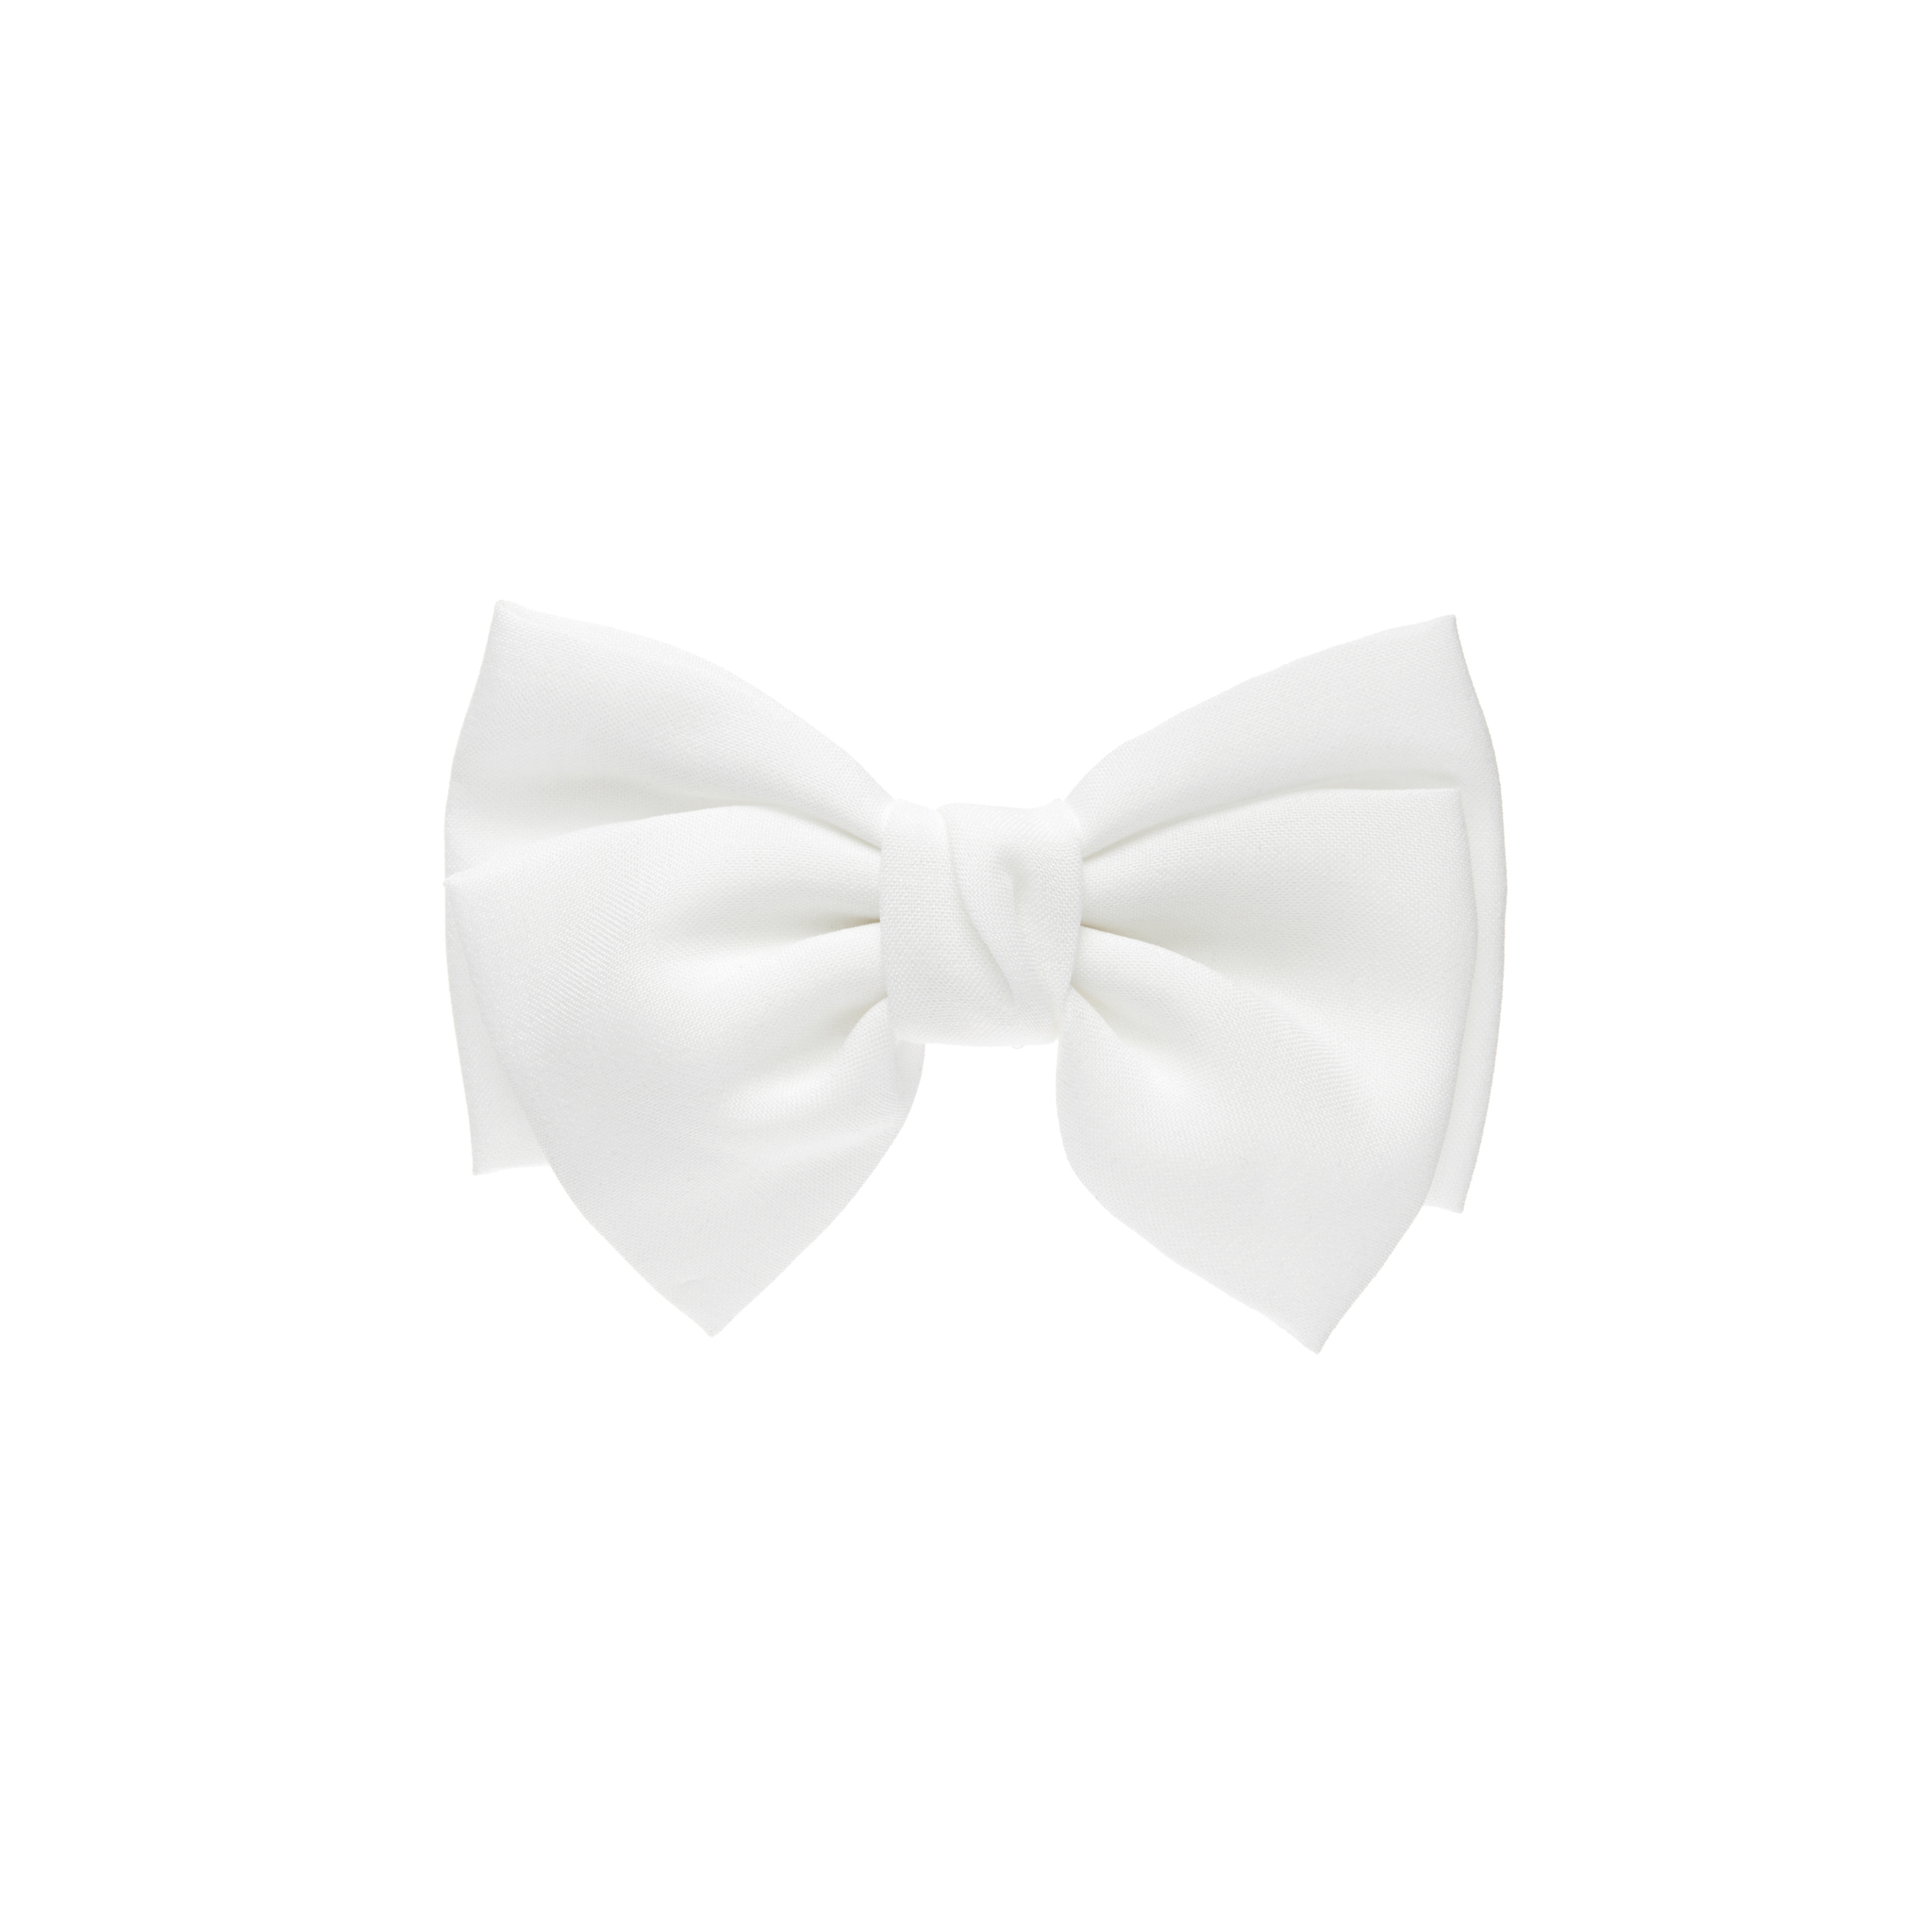 HOLLY JUNE Заколка Bow Hair Clip – White holly june заколка bow hair clip – red